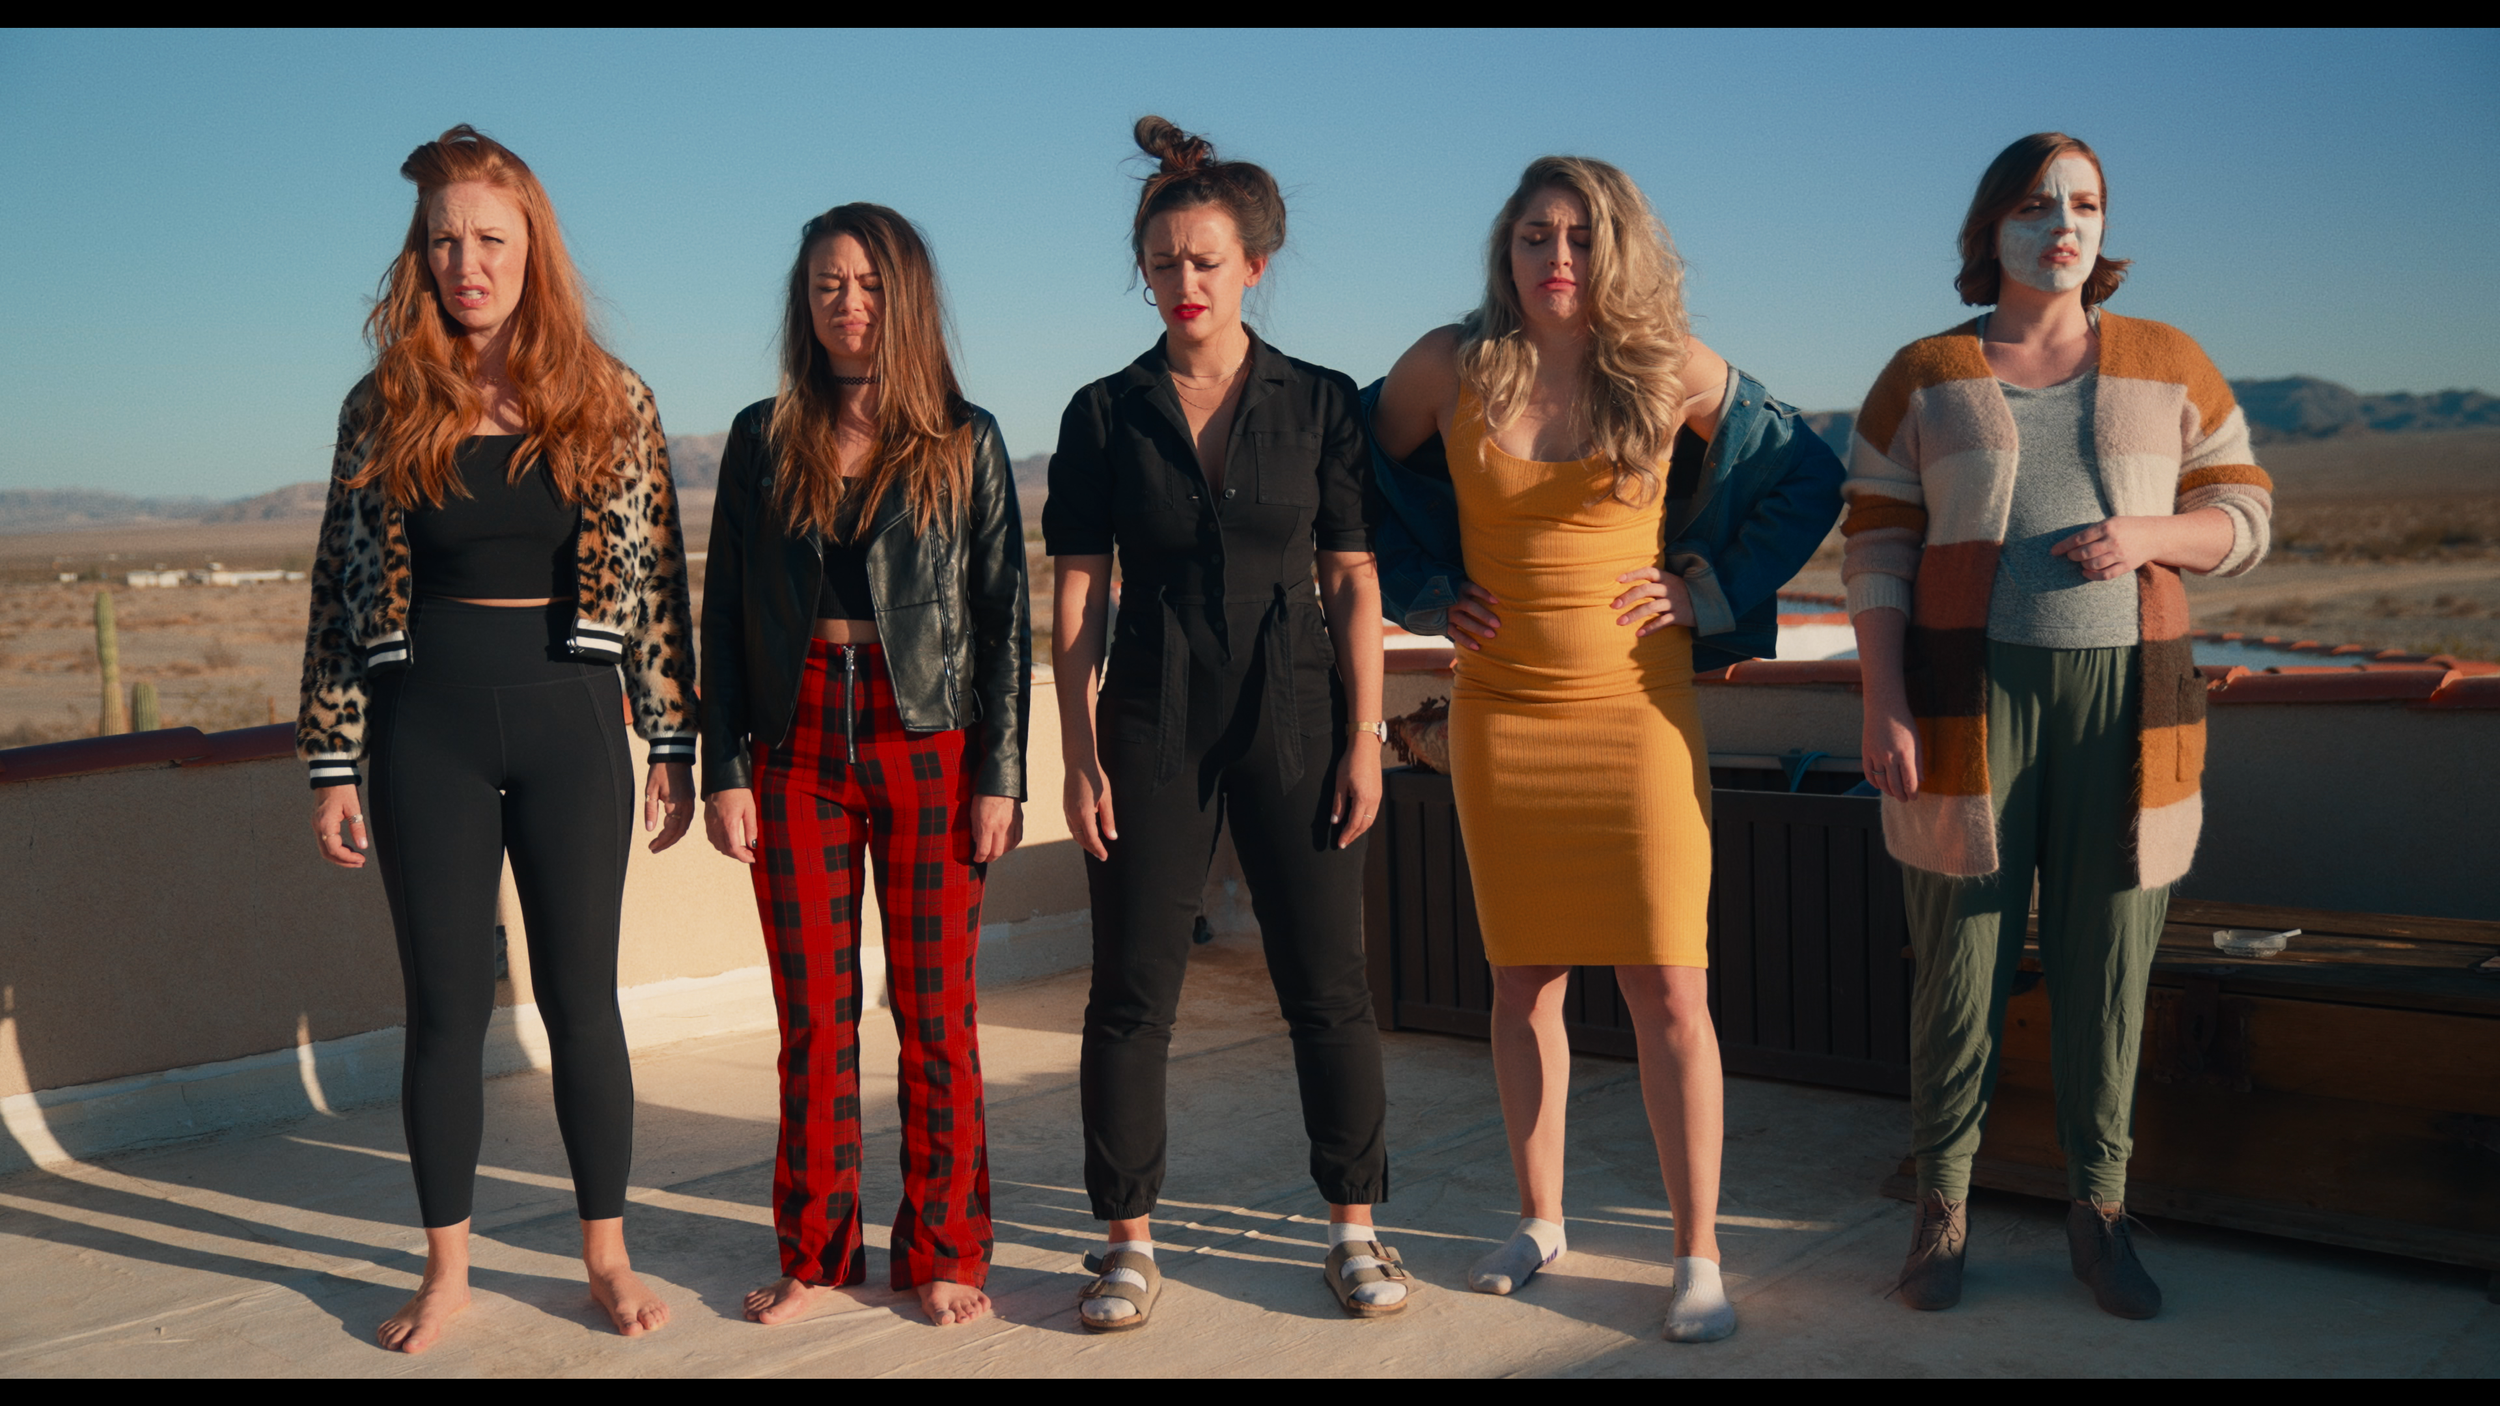 Claire Dellamar(Nora)_Geri Courtney-Austein(Marybeth)_Harley Bronwyn(Avery)_Mandie Cheung(Dylan)_Rochelle Anderson(Gillian)_Girls on Roof and Hungover.png